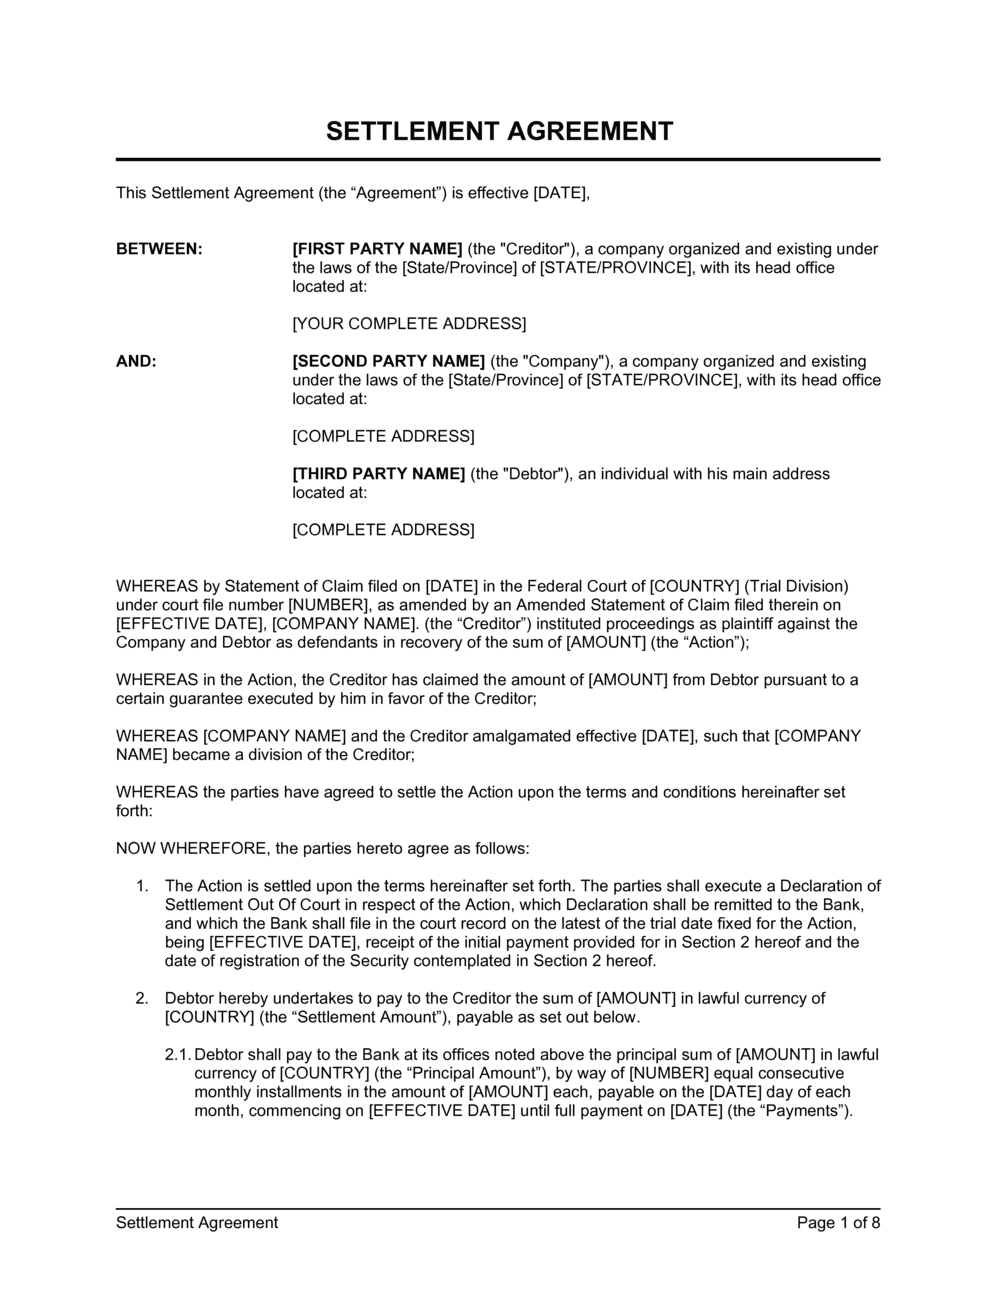 Settlement Agreement Template  by Business-in-a-Box™ Throughout full and final settlement agreement template